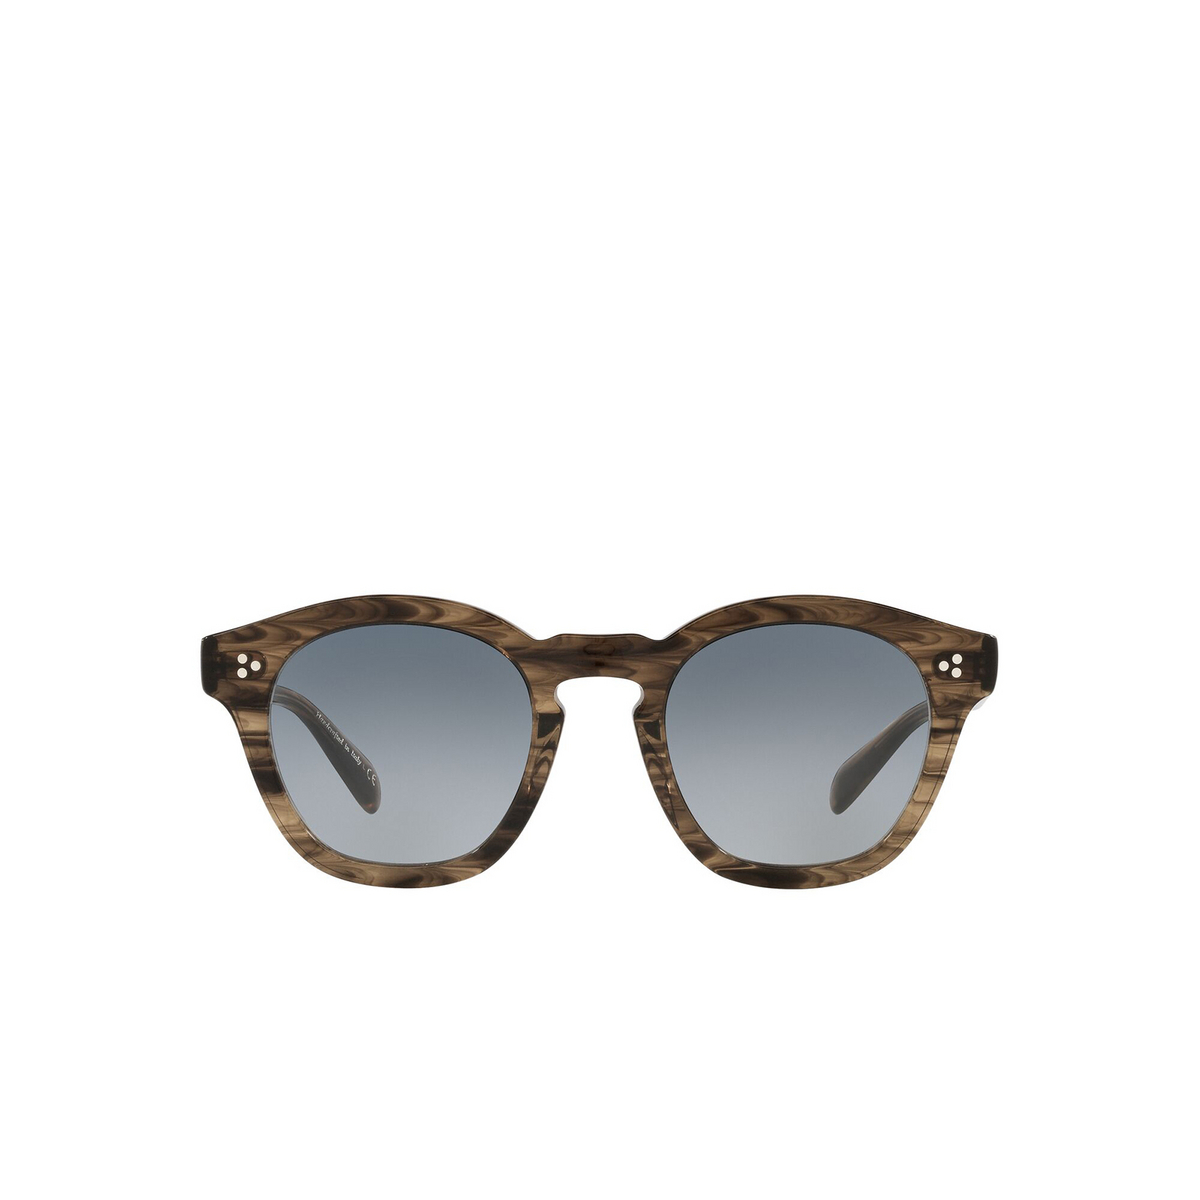 Oliver Peoples BOUDREAU L.A Sunglasses 16898G Sepia Smoke - front view